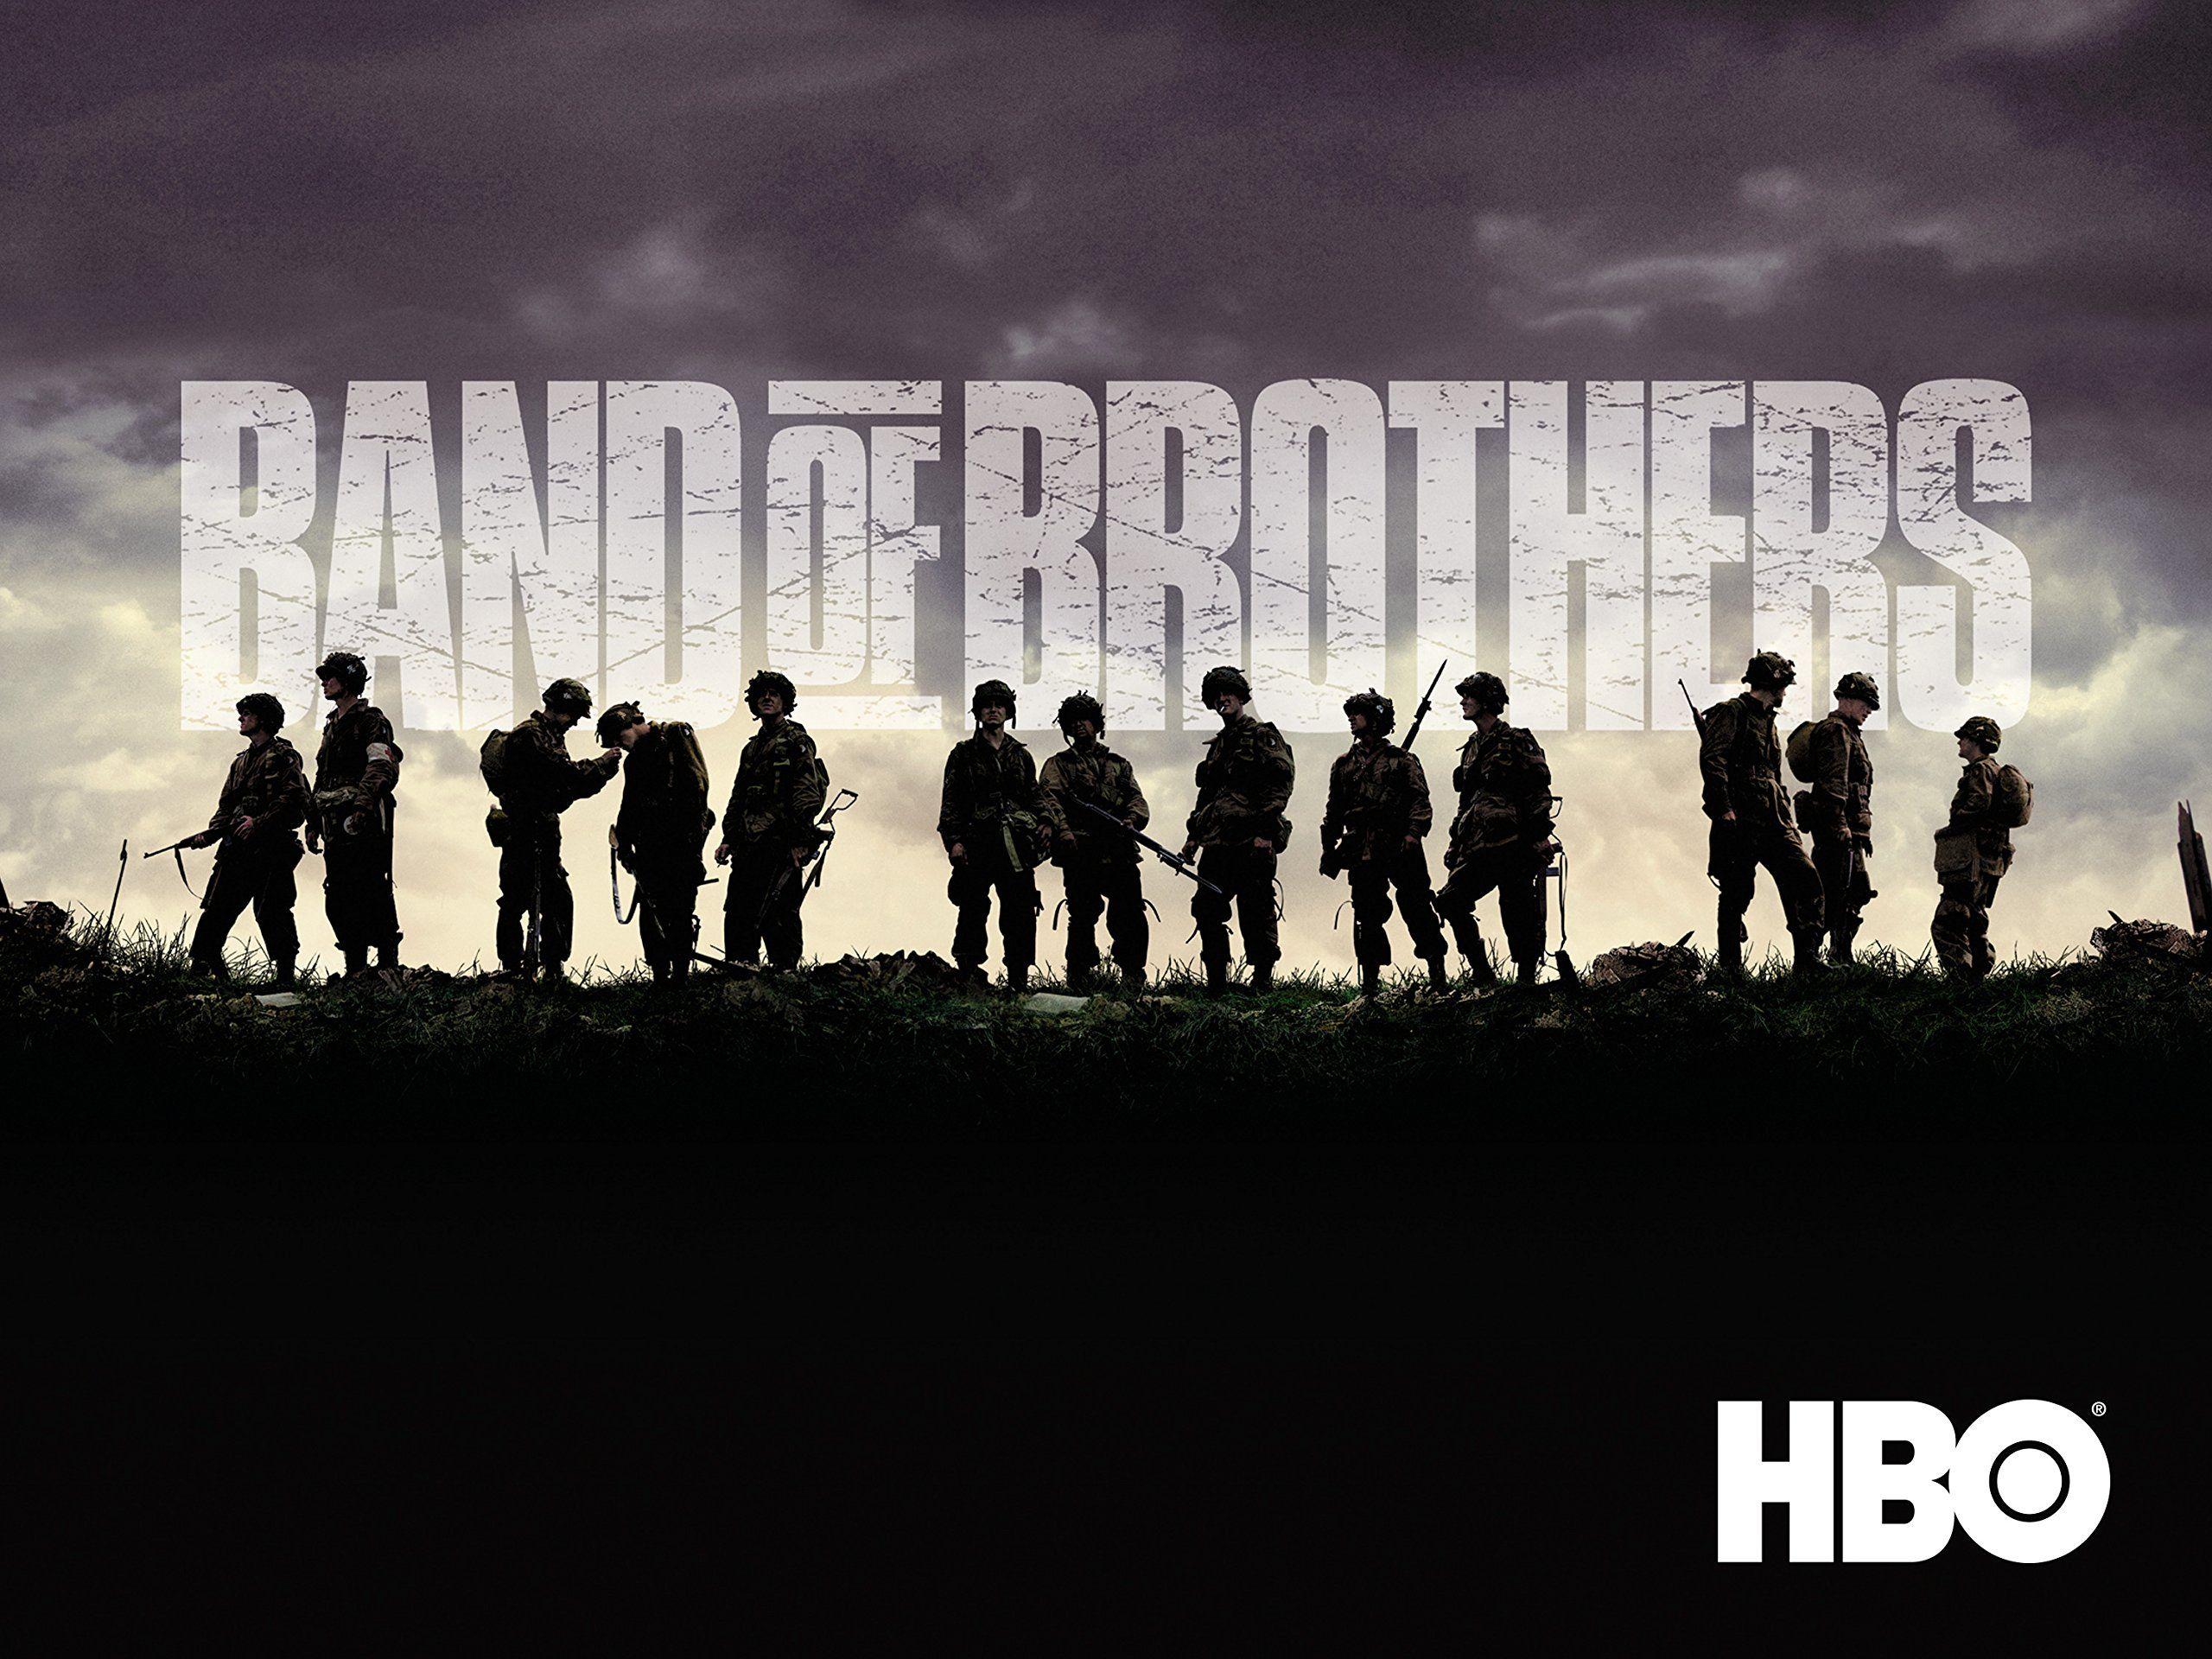 Band of Brothers Logo - Amazon.com: Watch Band of Brothers Season 1 | Prime Video